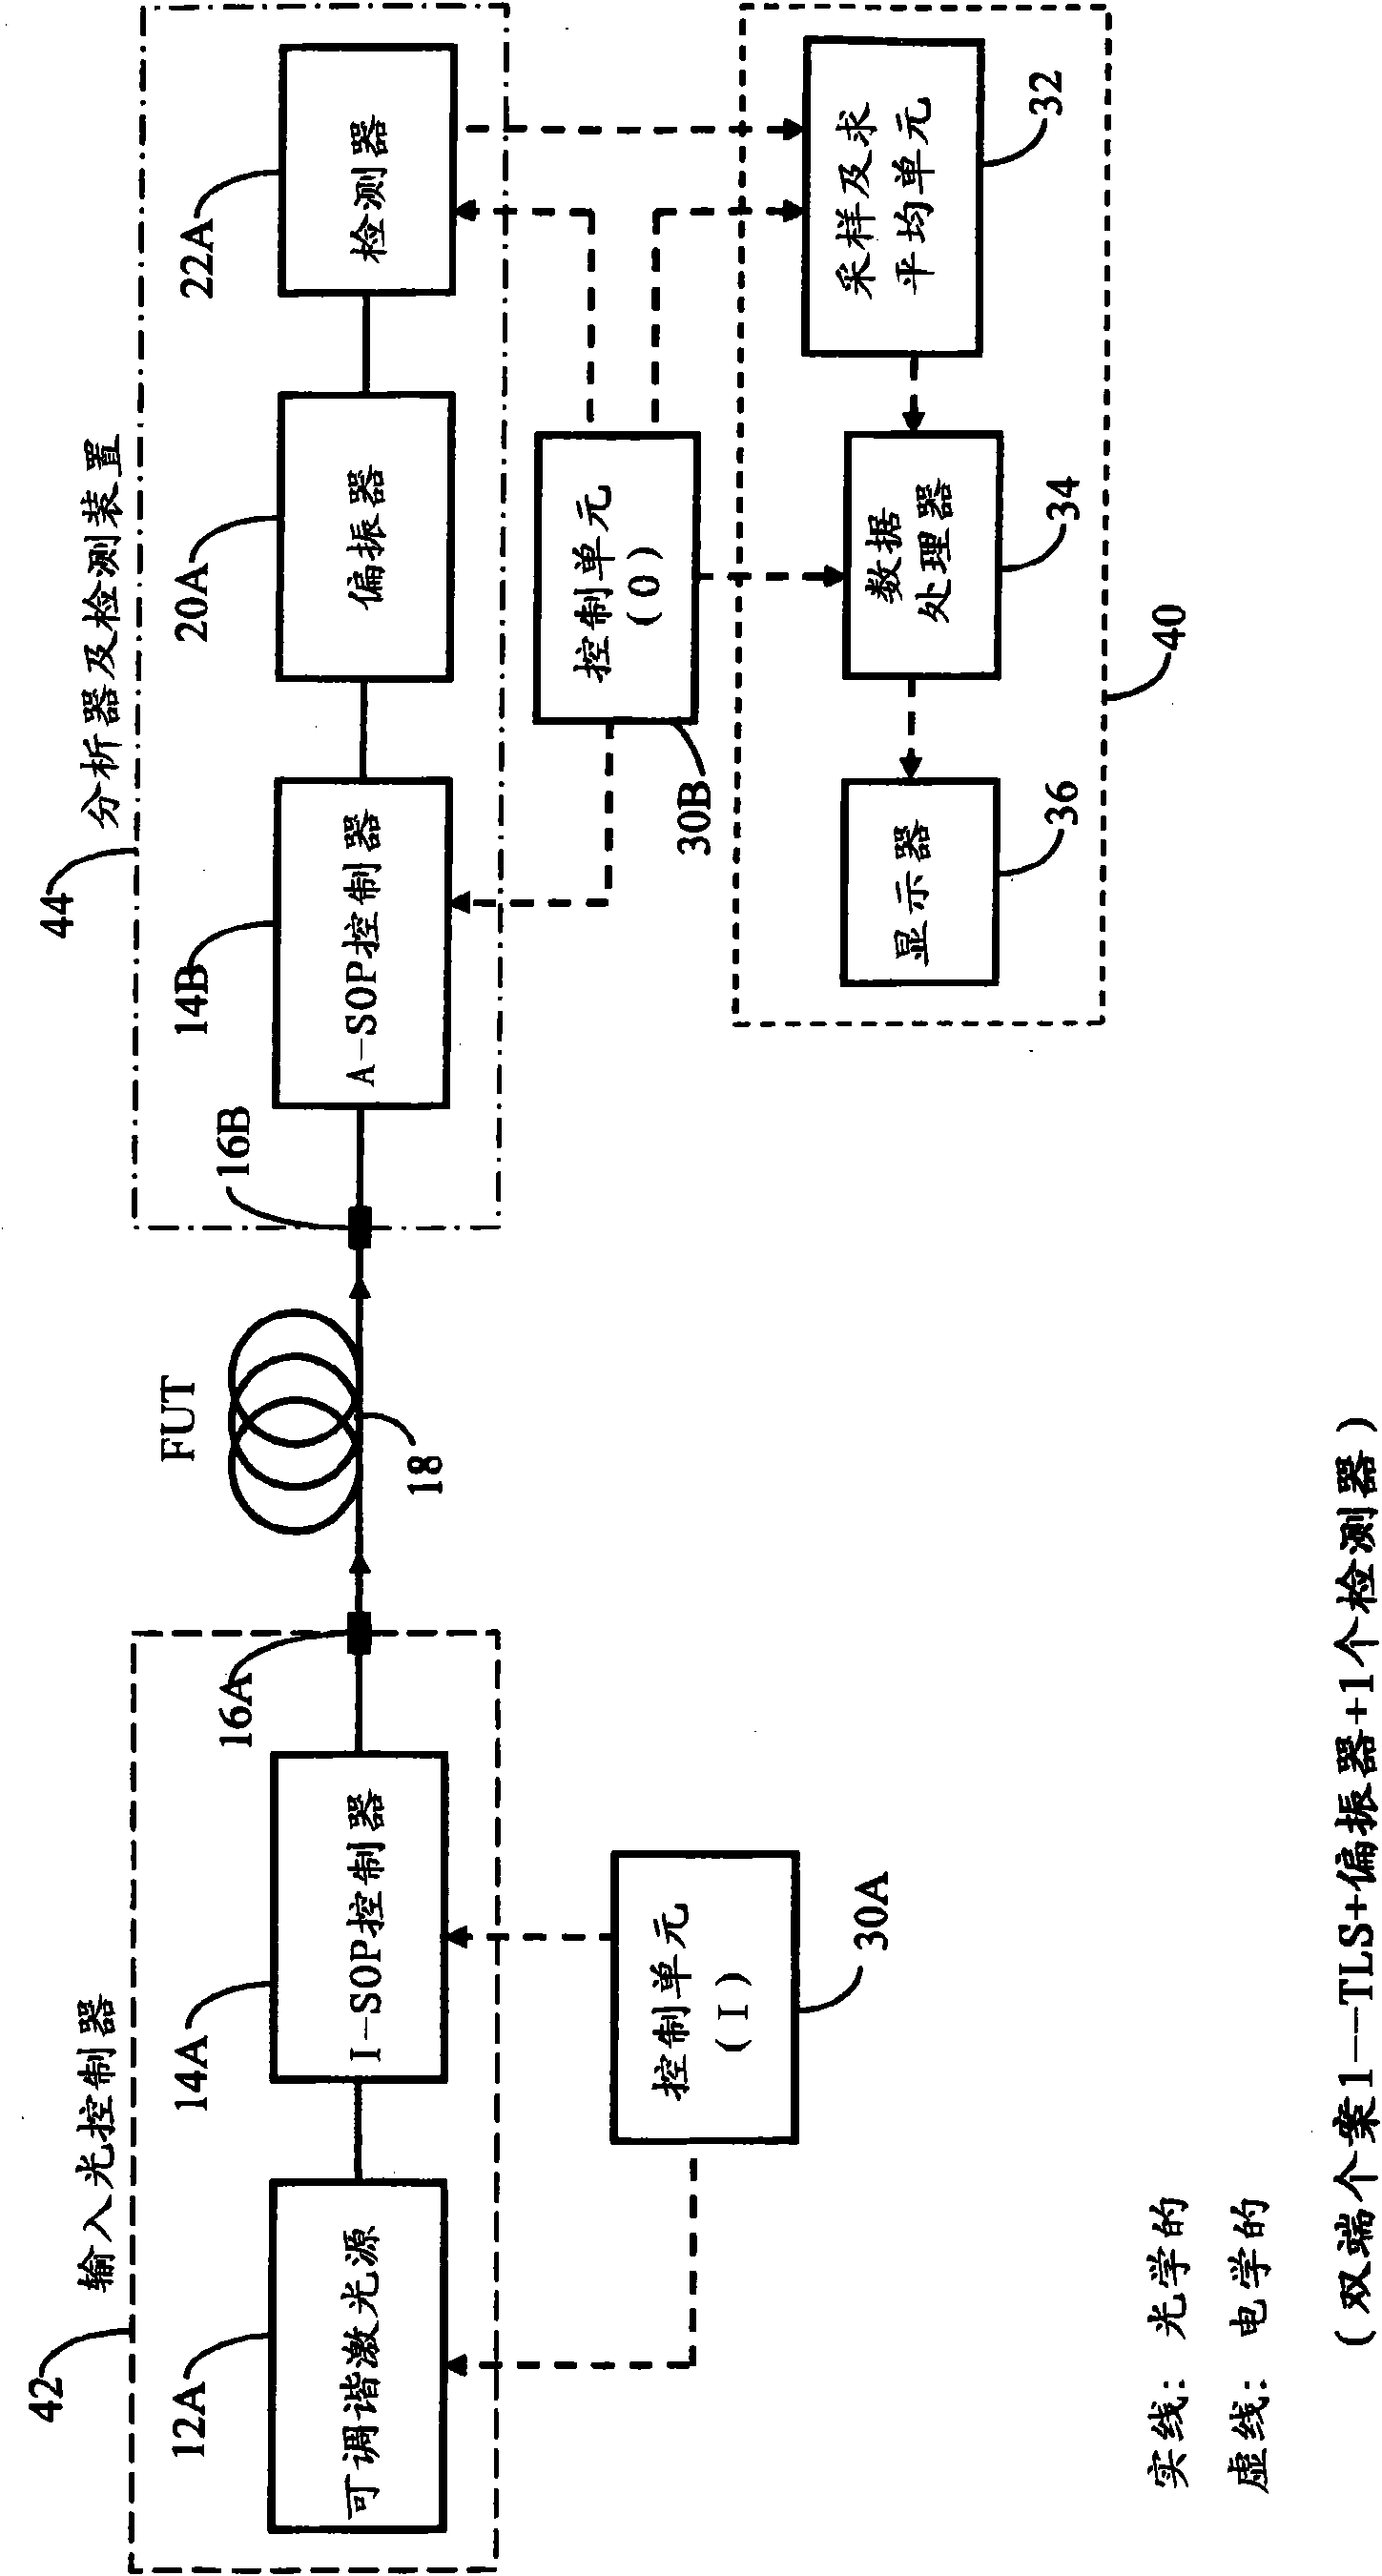 Method and apparatus for determining differential group delay and polarization mode dispersion